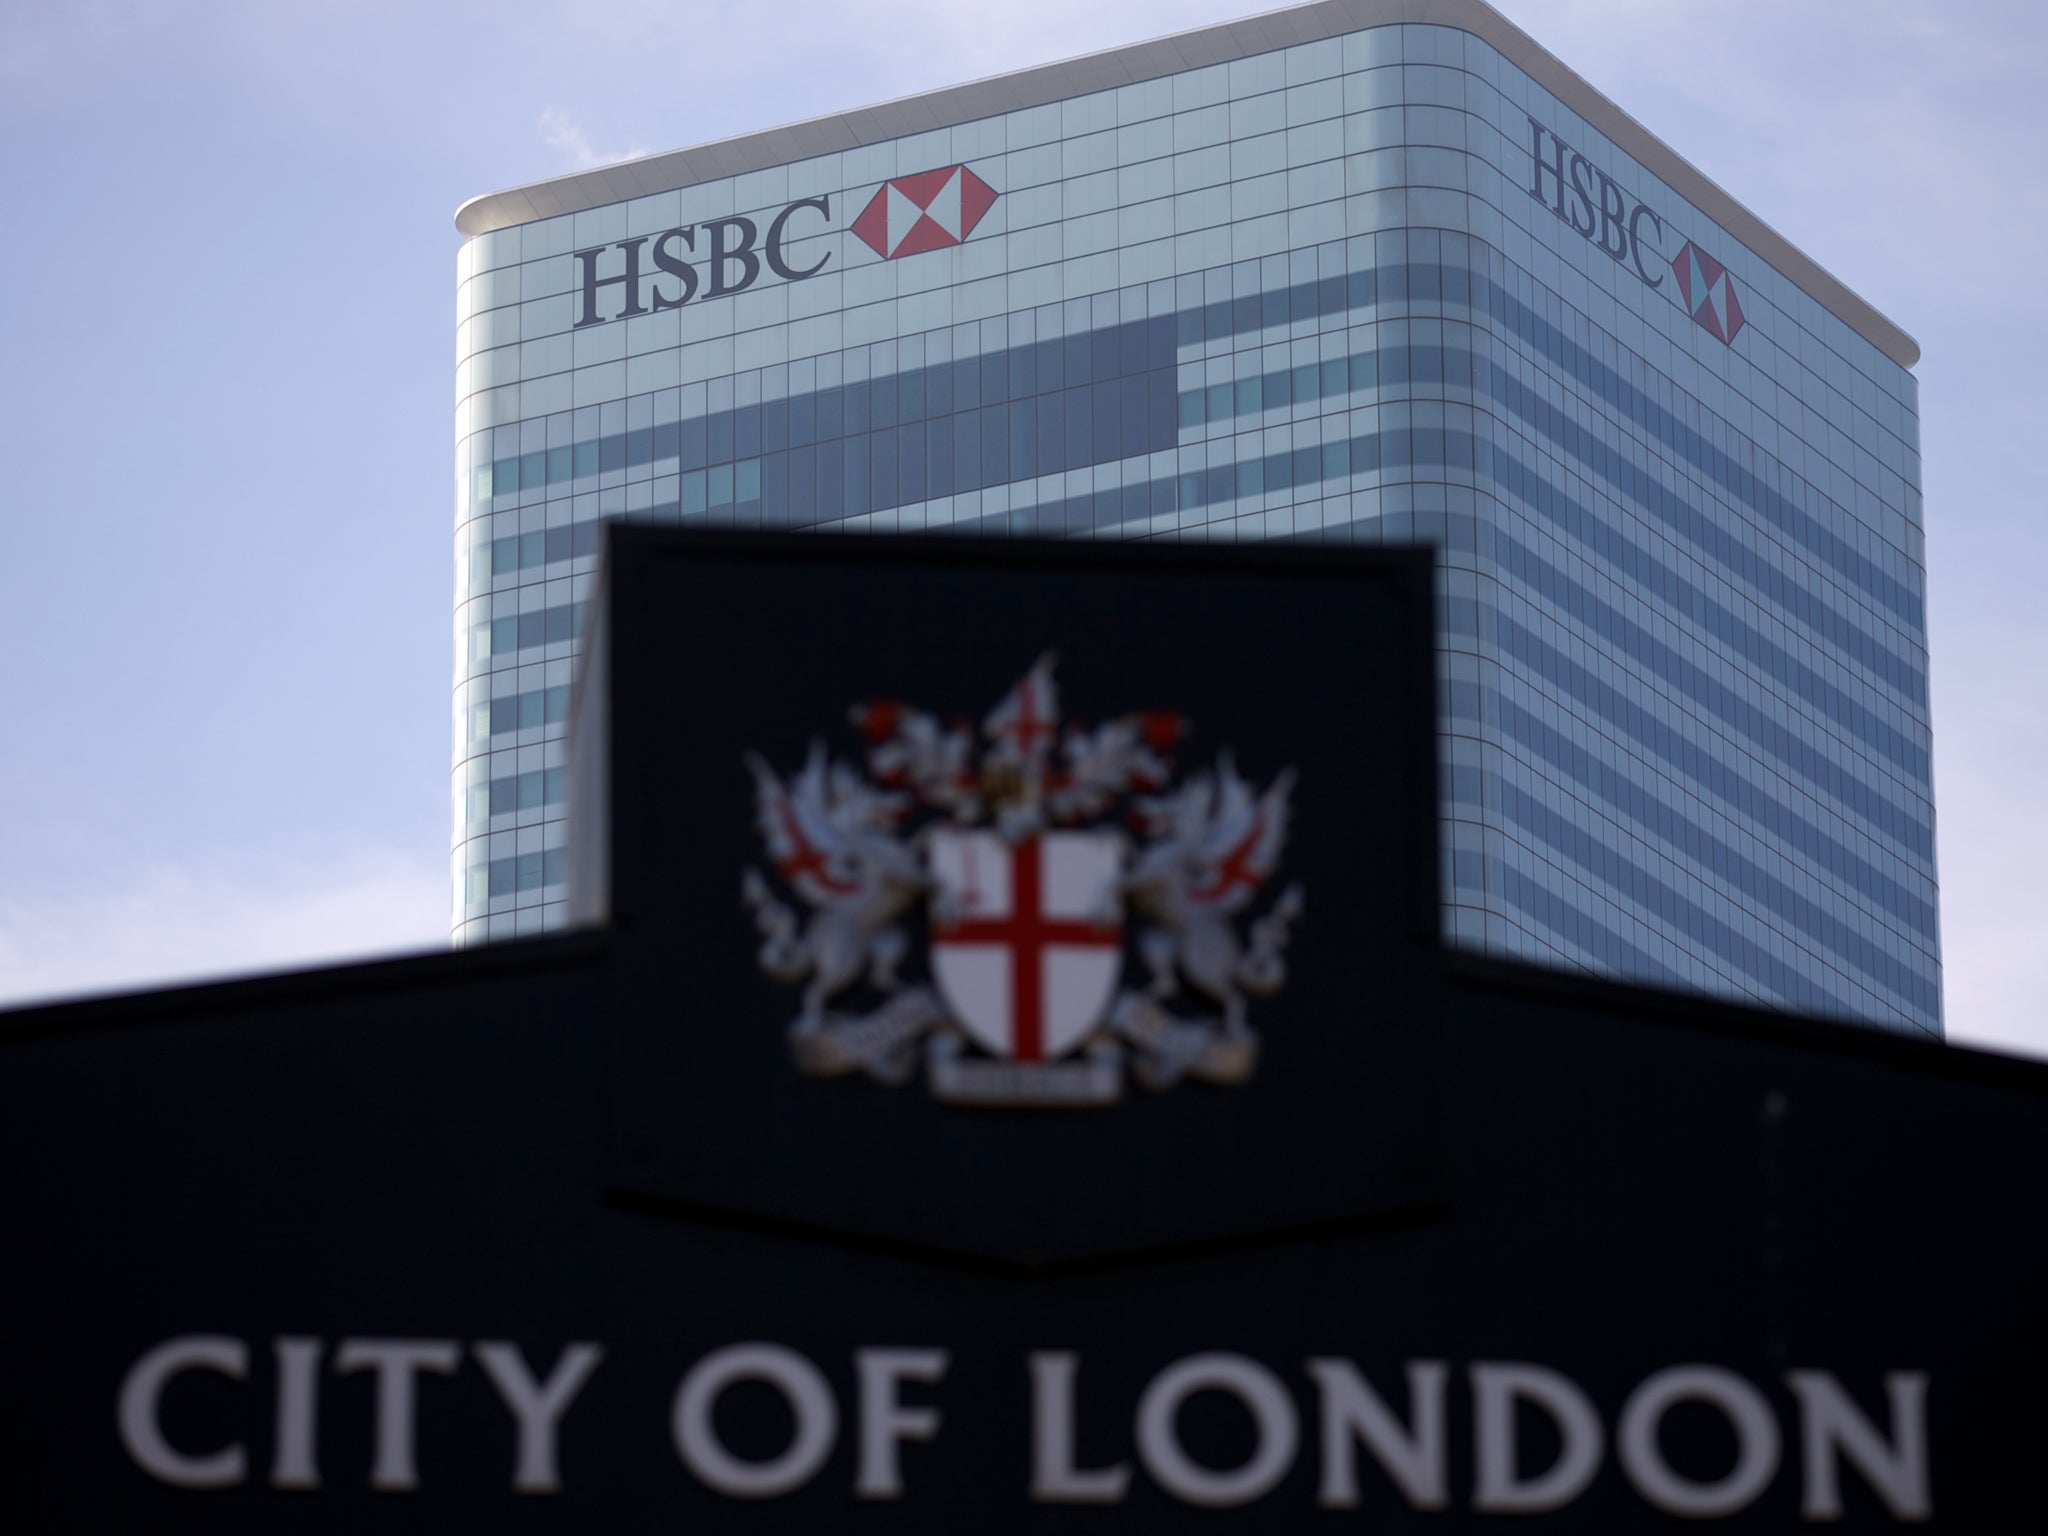 HSBC said it had suspended two workers in its London headquarters